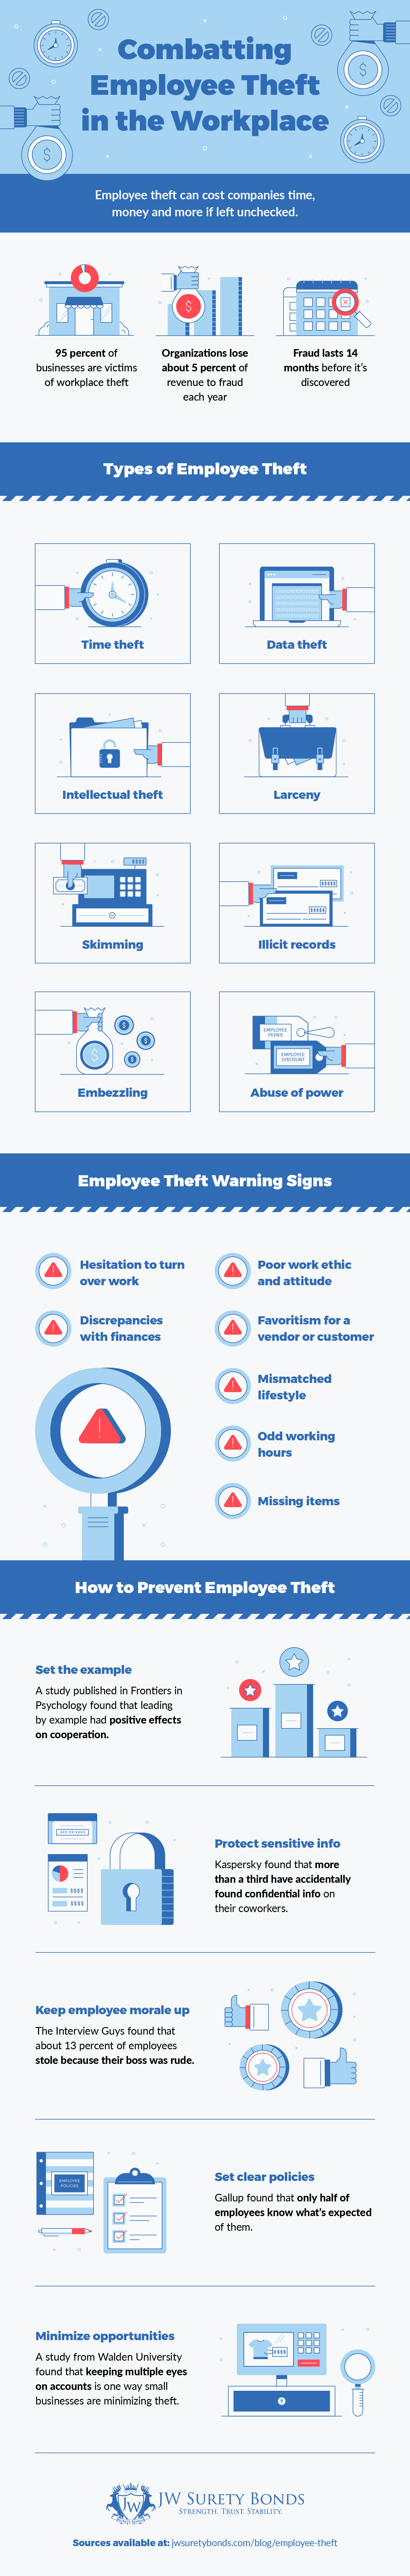 combating employee theft in the workplace infogrpahic